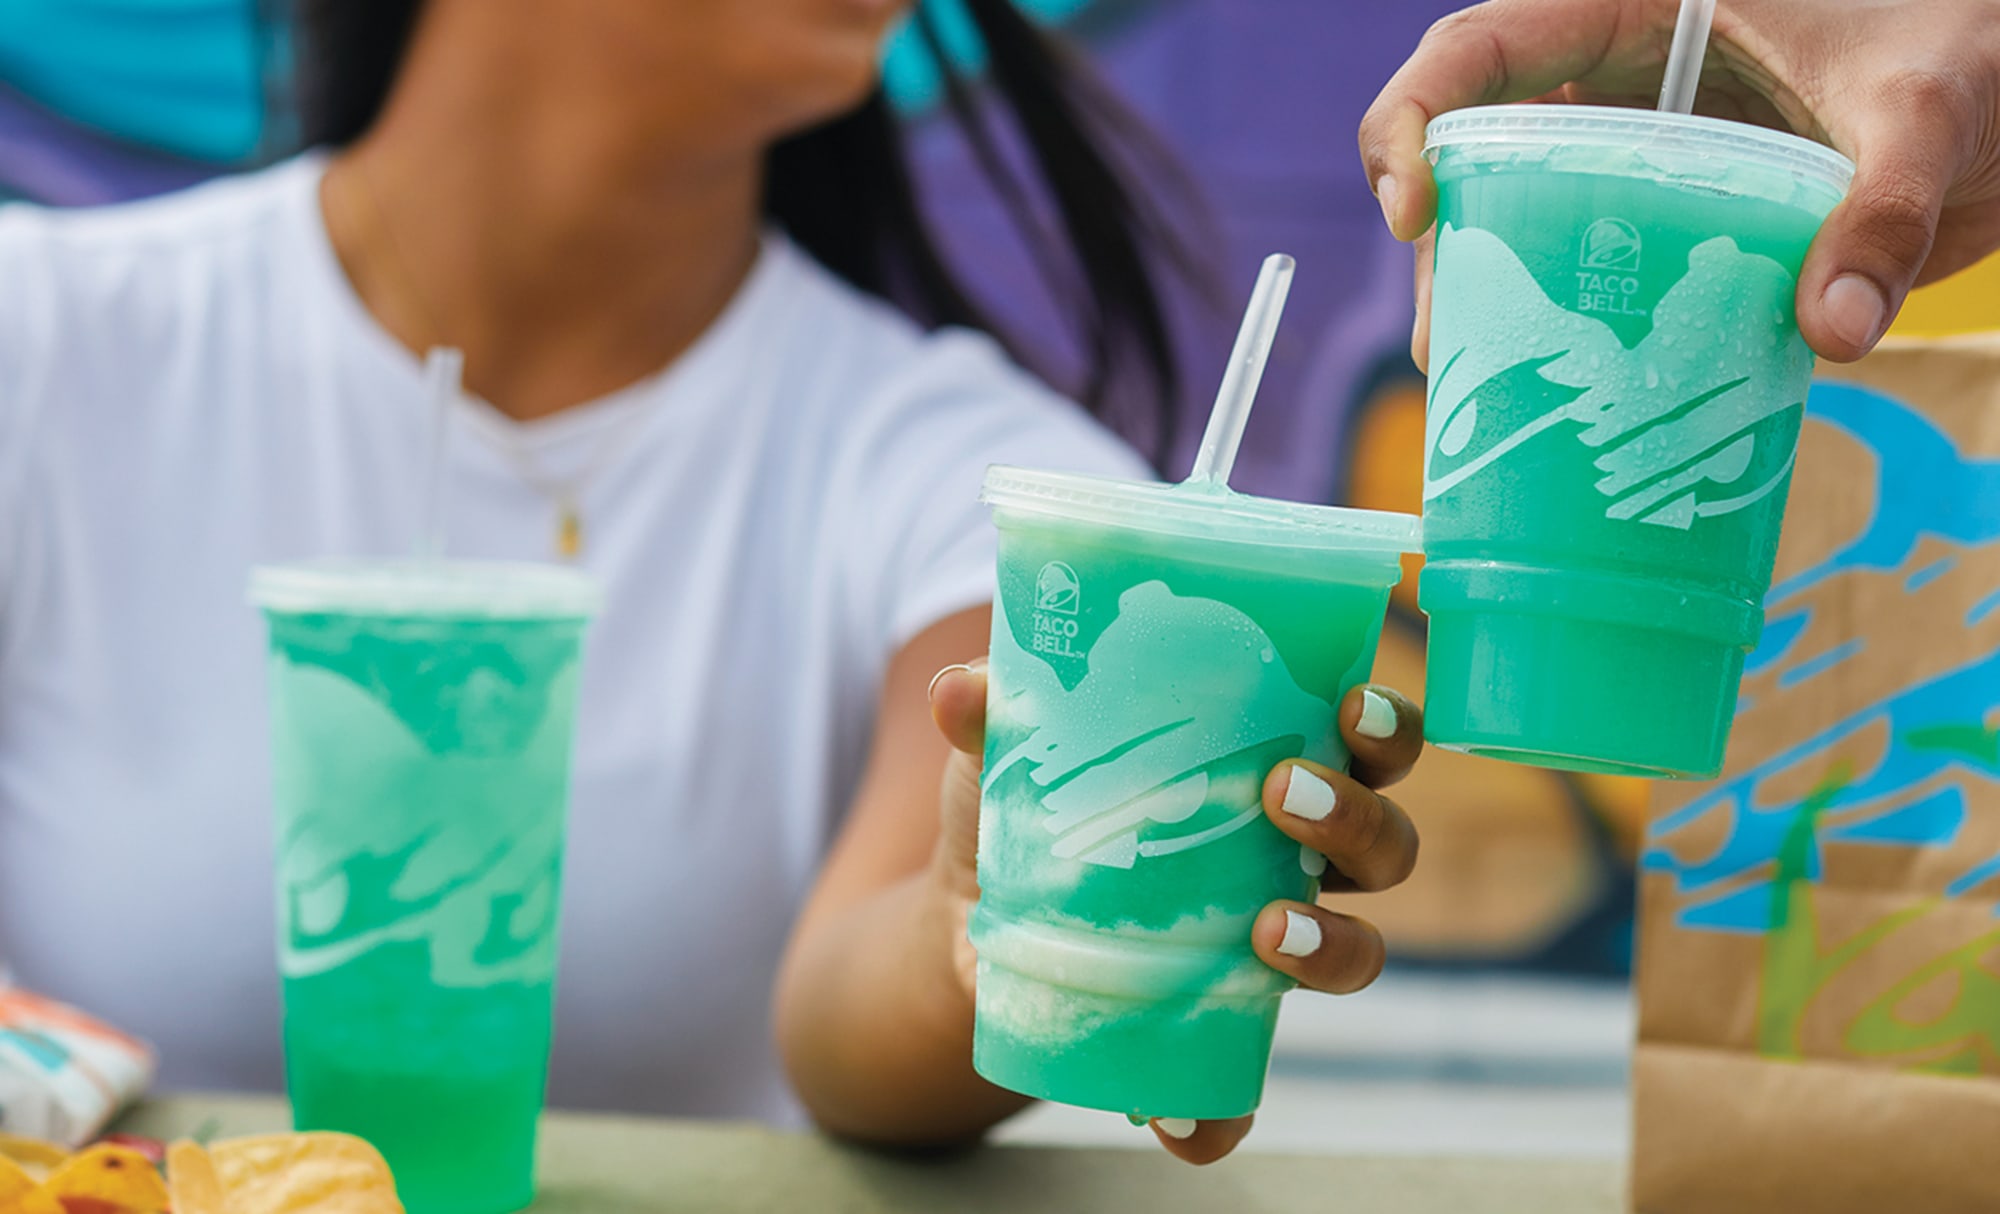 New Taco Bell Freeze Hacks are delicious tropical refreshment